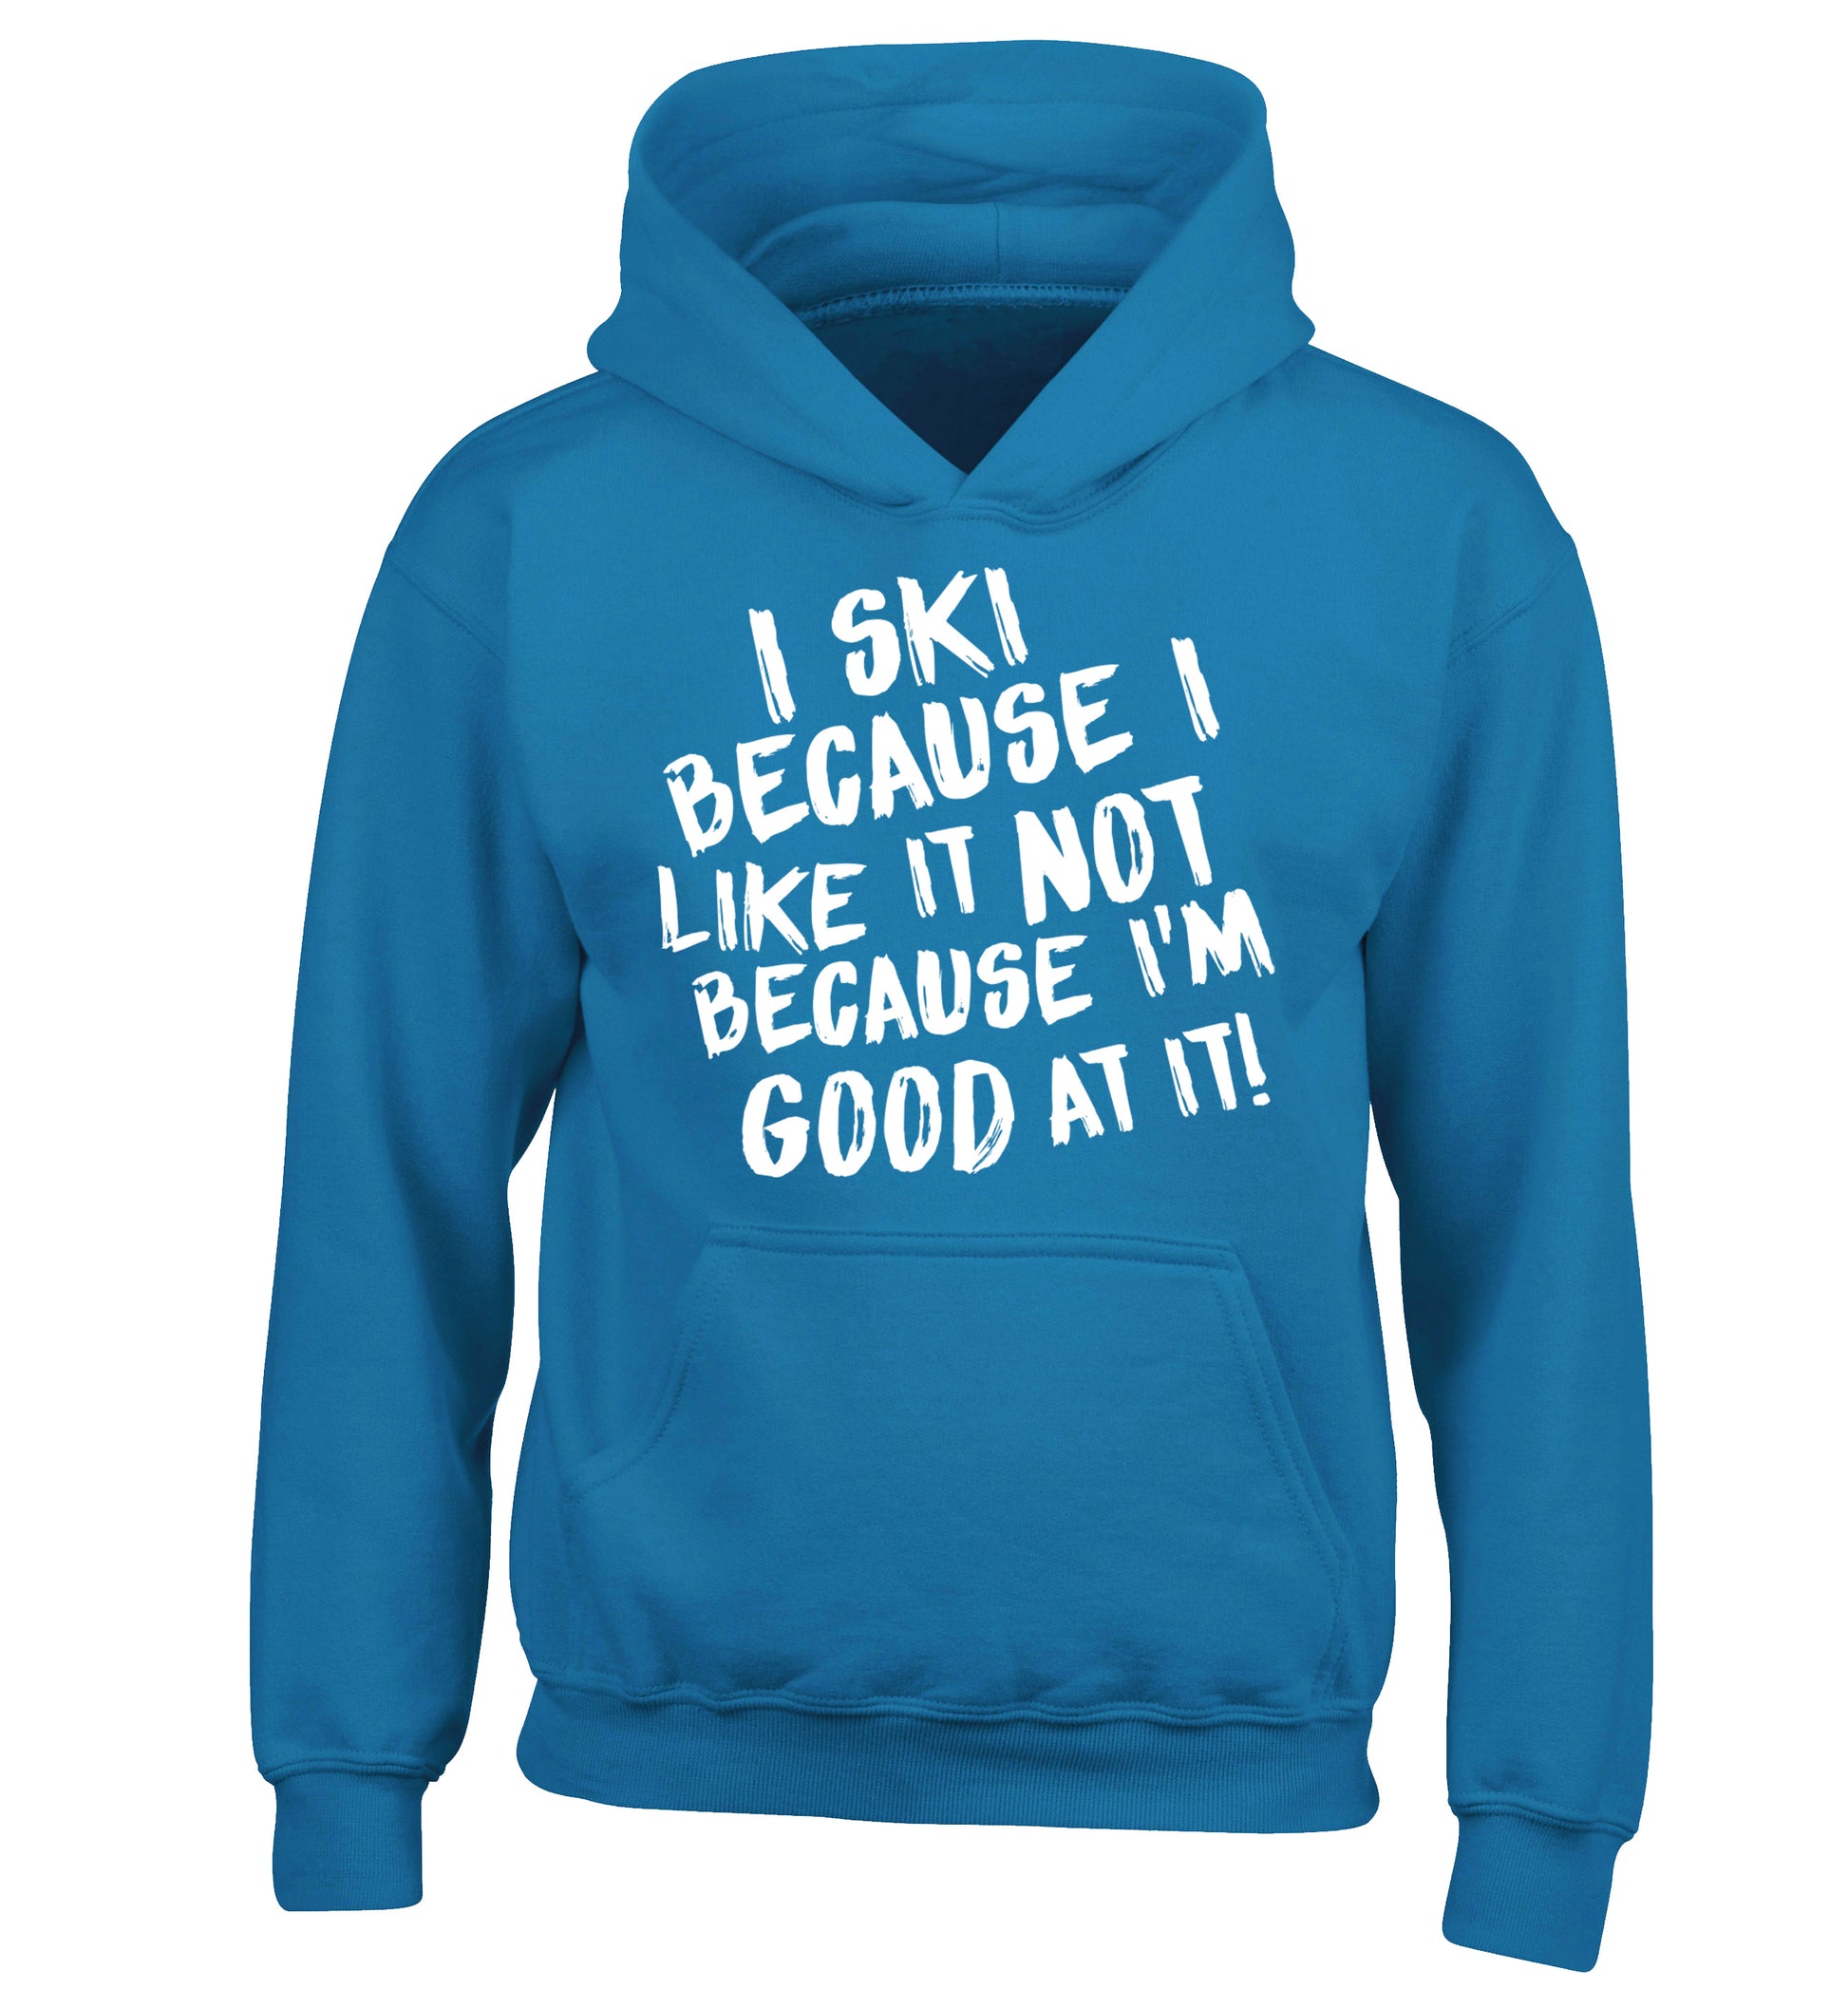 I ski because I like it not because I'm good at it children's blue hoodie 12-14 Years